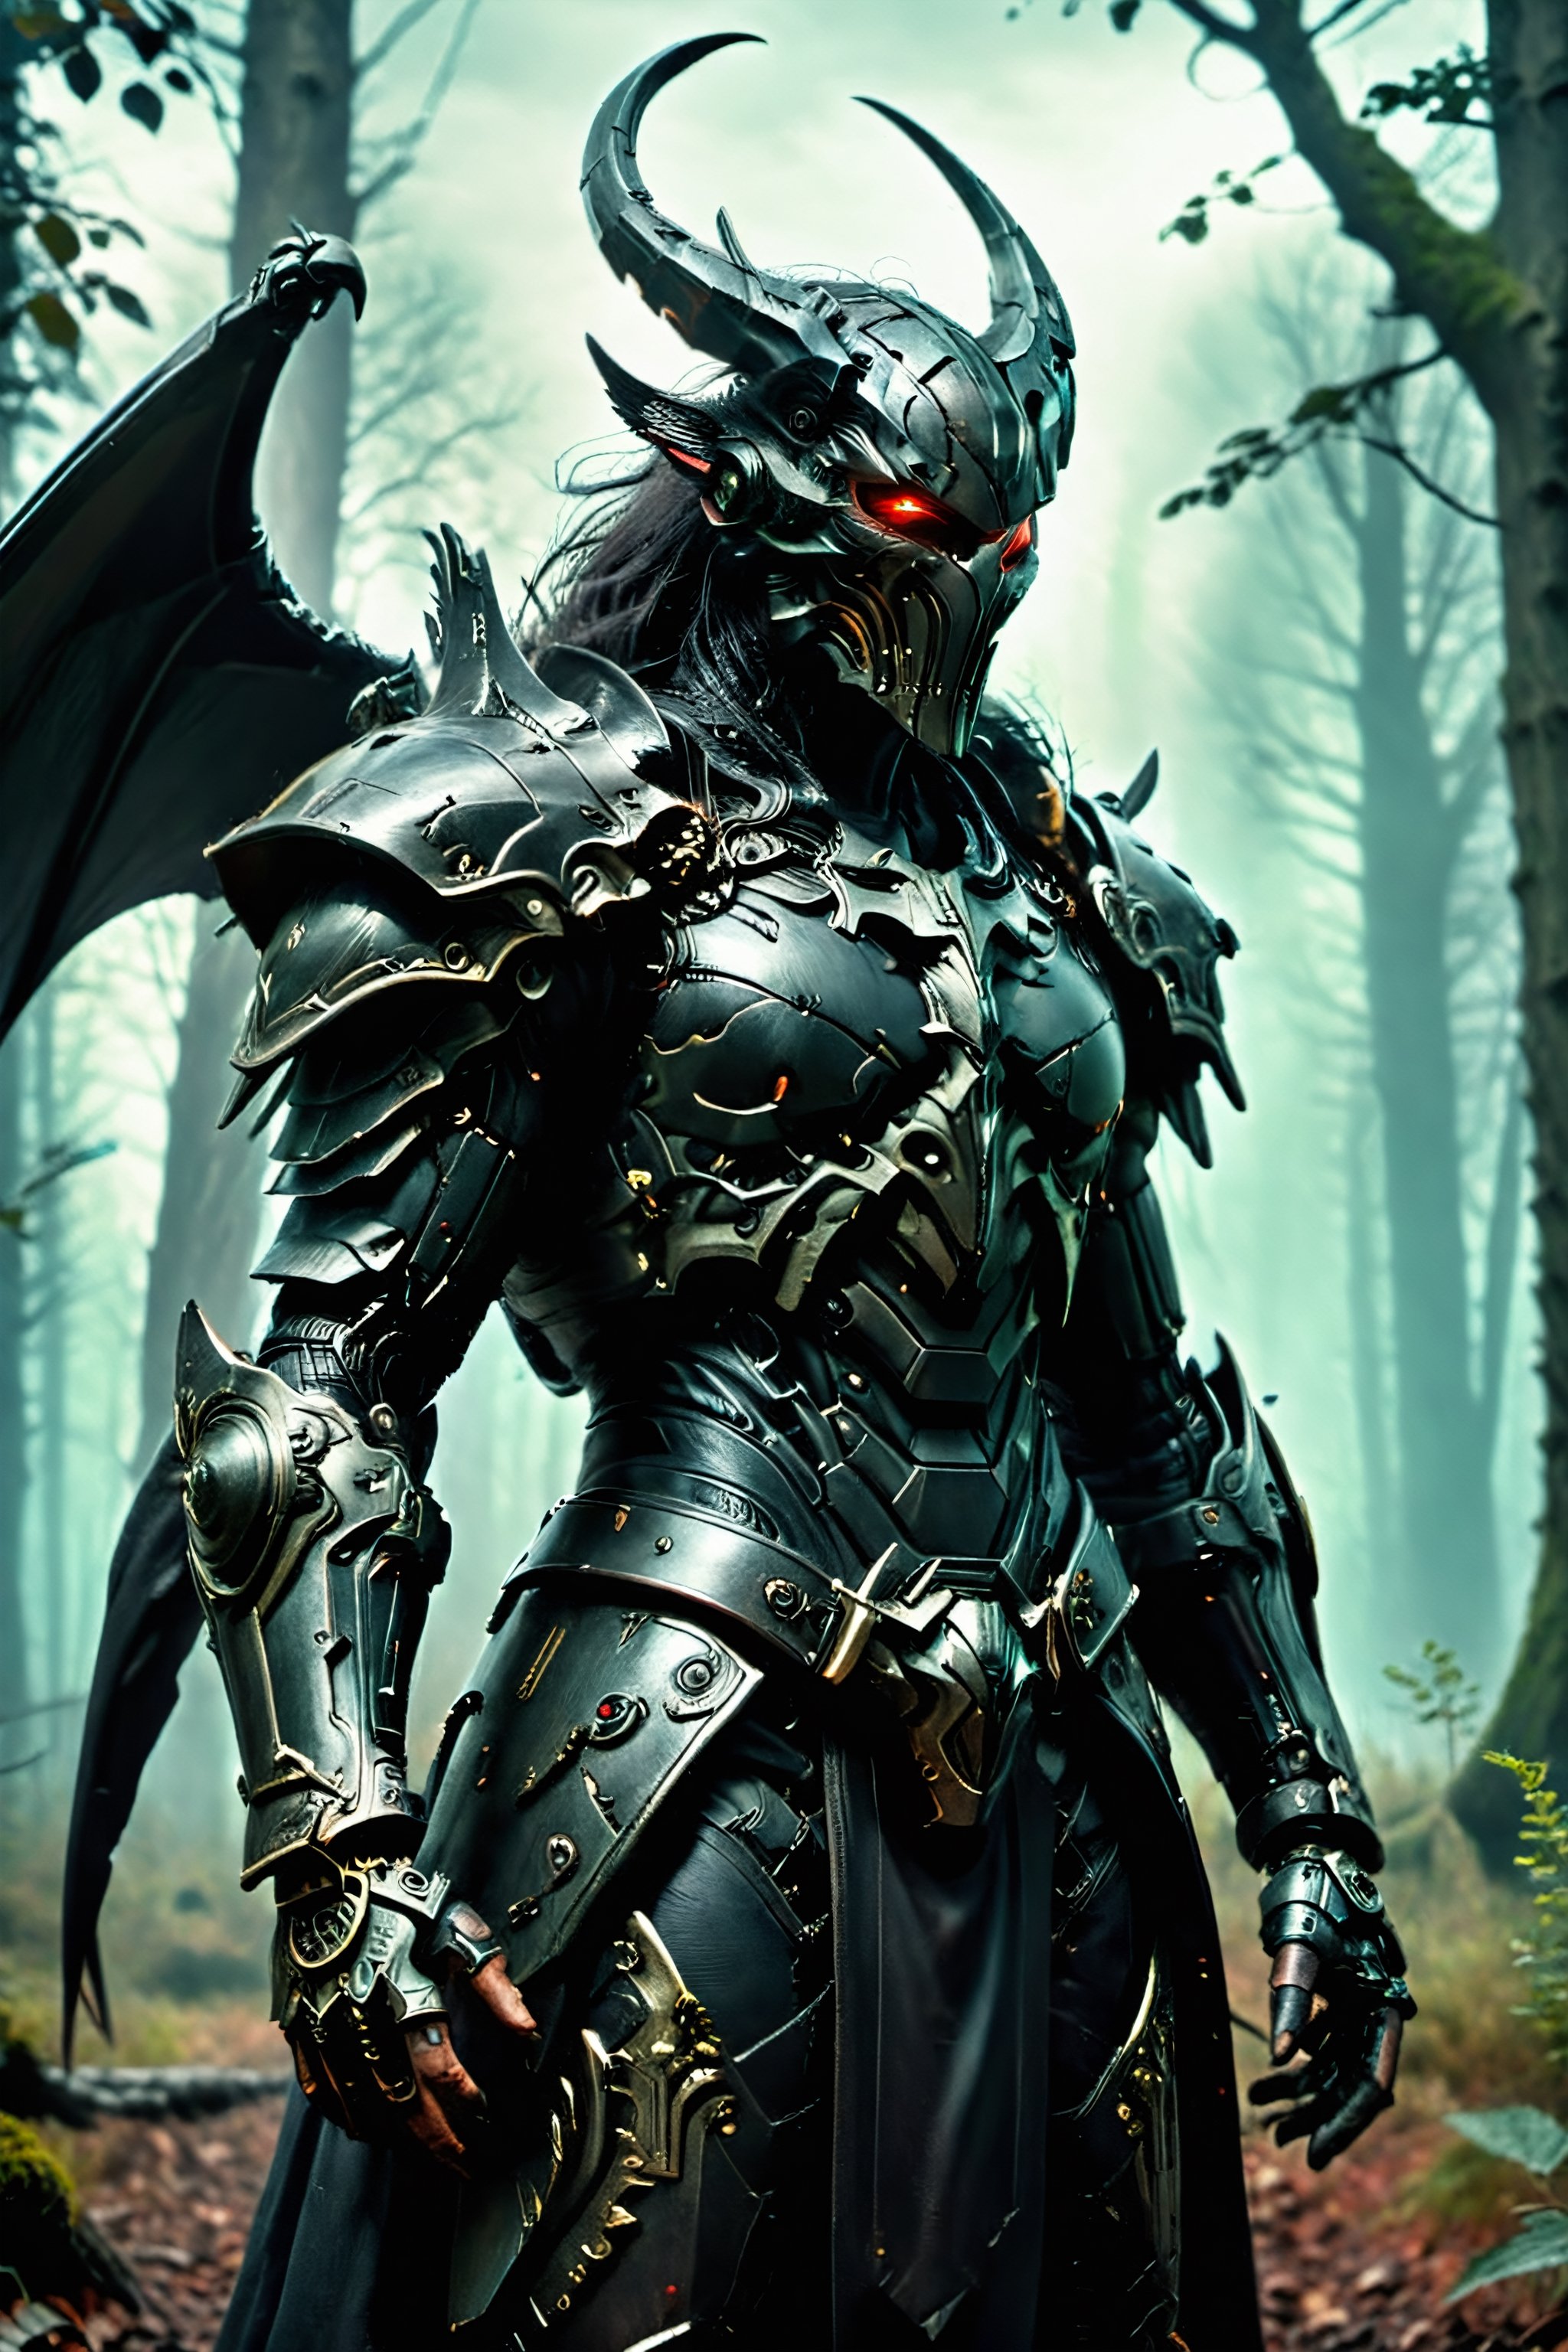 extremely realistic, Chernobog the king of the dark, wearing black intricately detailed armor with chiseled micro details. Robotic augmentation, Slavic Folk, a background of [Malevolent Skies, Dark Forests.], in the colors [Ominous Reds] and [Eerie Greens.], immersive, blending shadowy allure with mythical narratives, expansive, otherworldly atmospheric, visually captivating, in the style [Malevolent Realism and Gothic Fantasy].  cyberpunk style, detailmaster2,Extremely Realistic